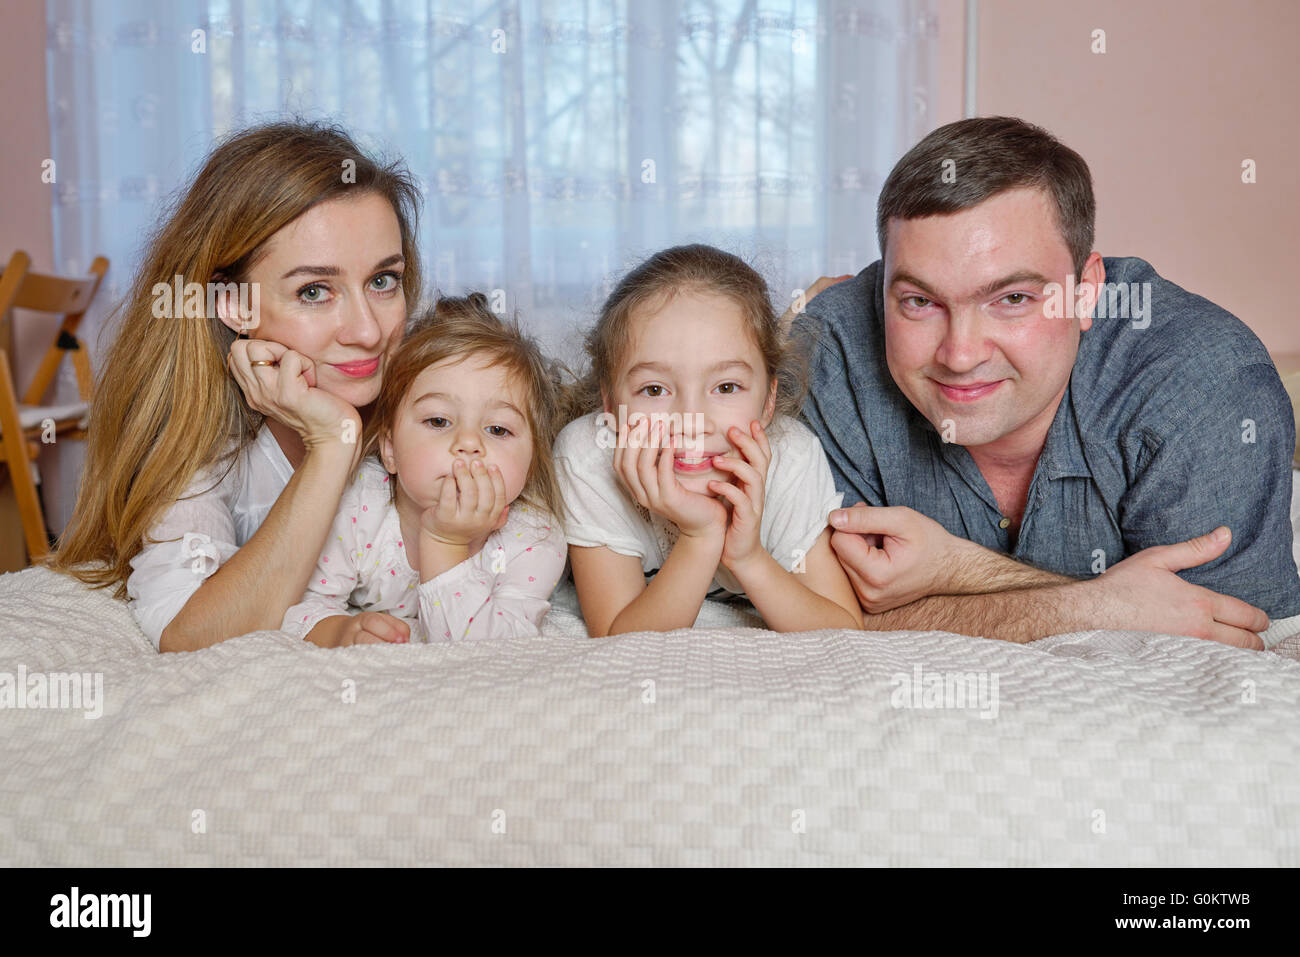 happy young family lying in bed Stock Photo